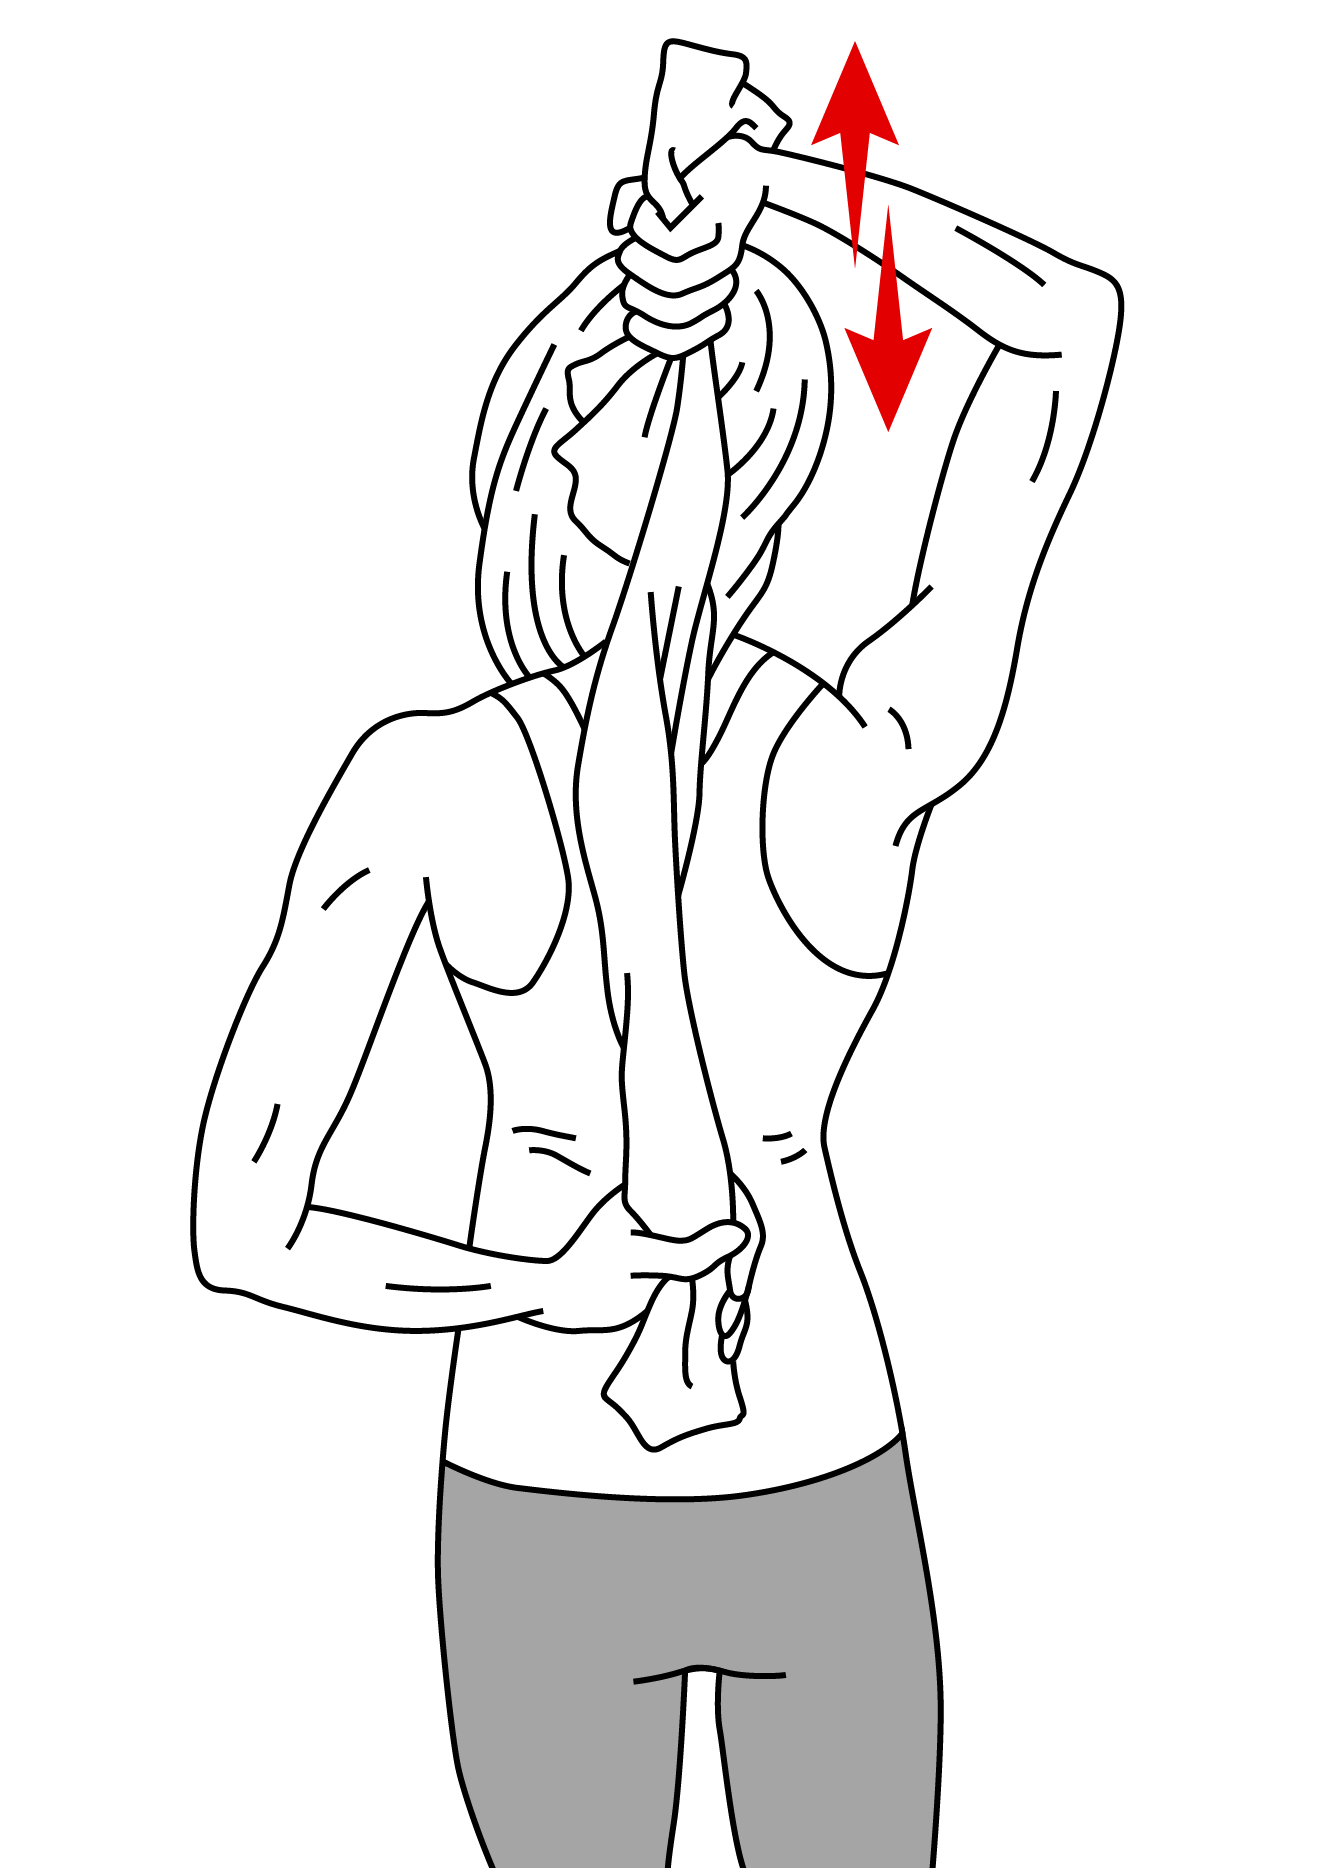 Towel Stretch | Levator Scapulae, Stretch, Stretching and more | Niel Asher  Education Exercises and Stretches blog